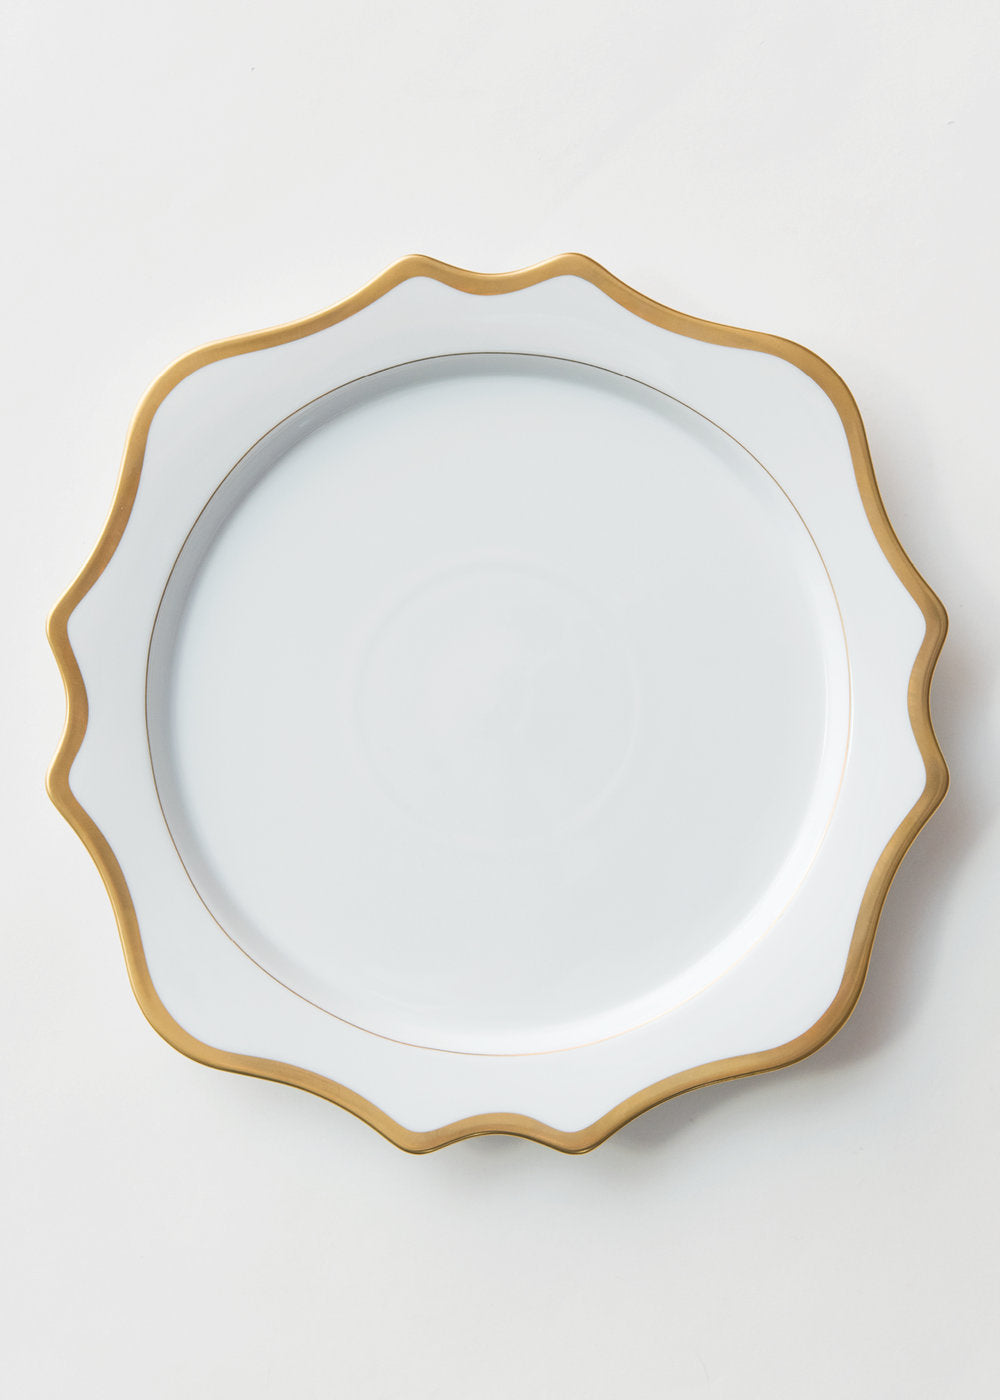 Antique White/Gold Charger Plate